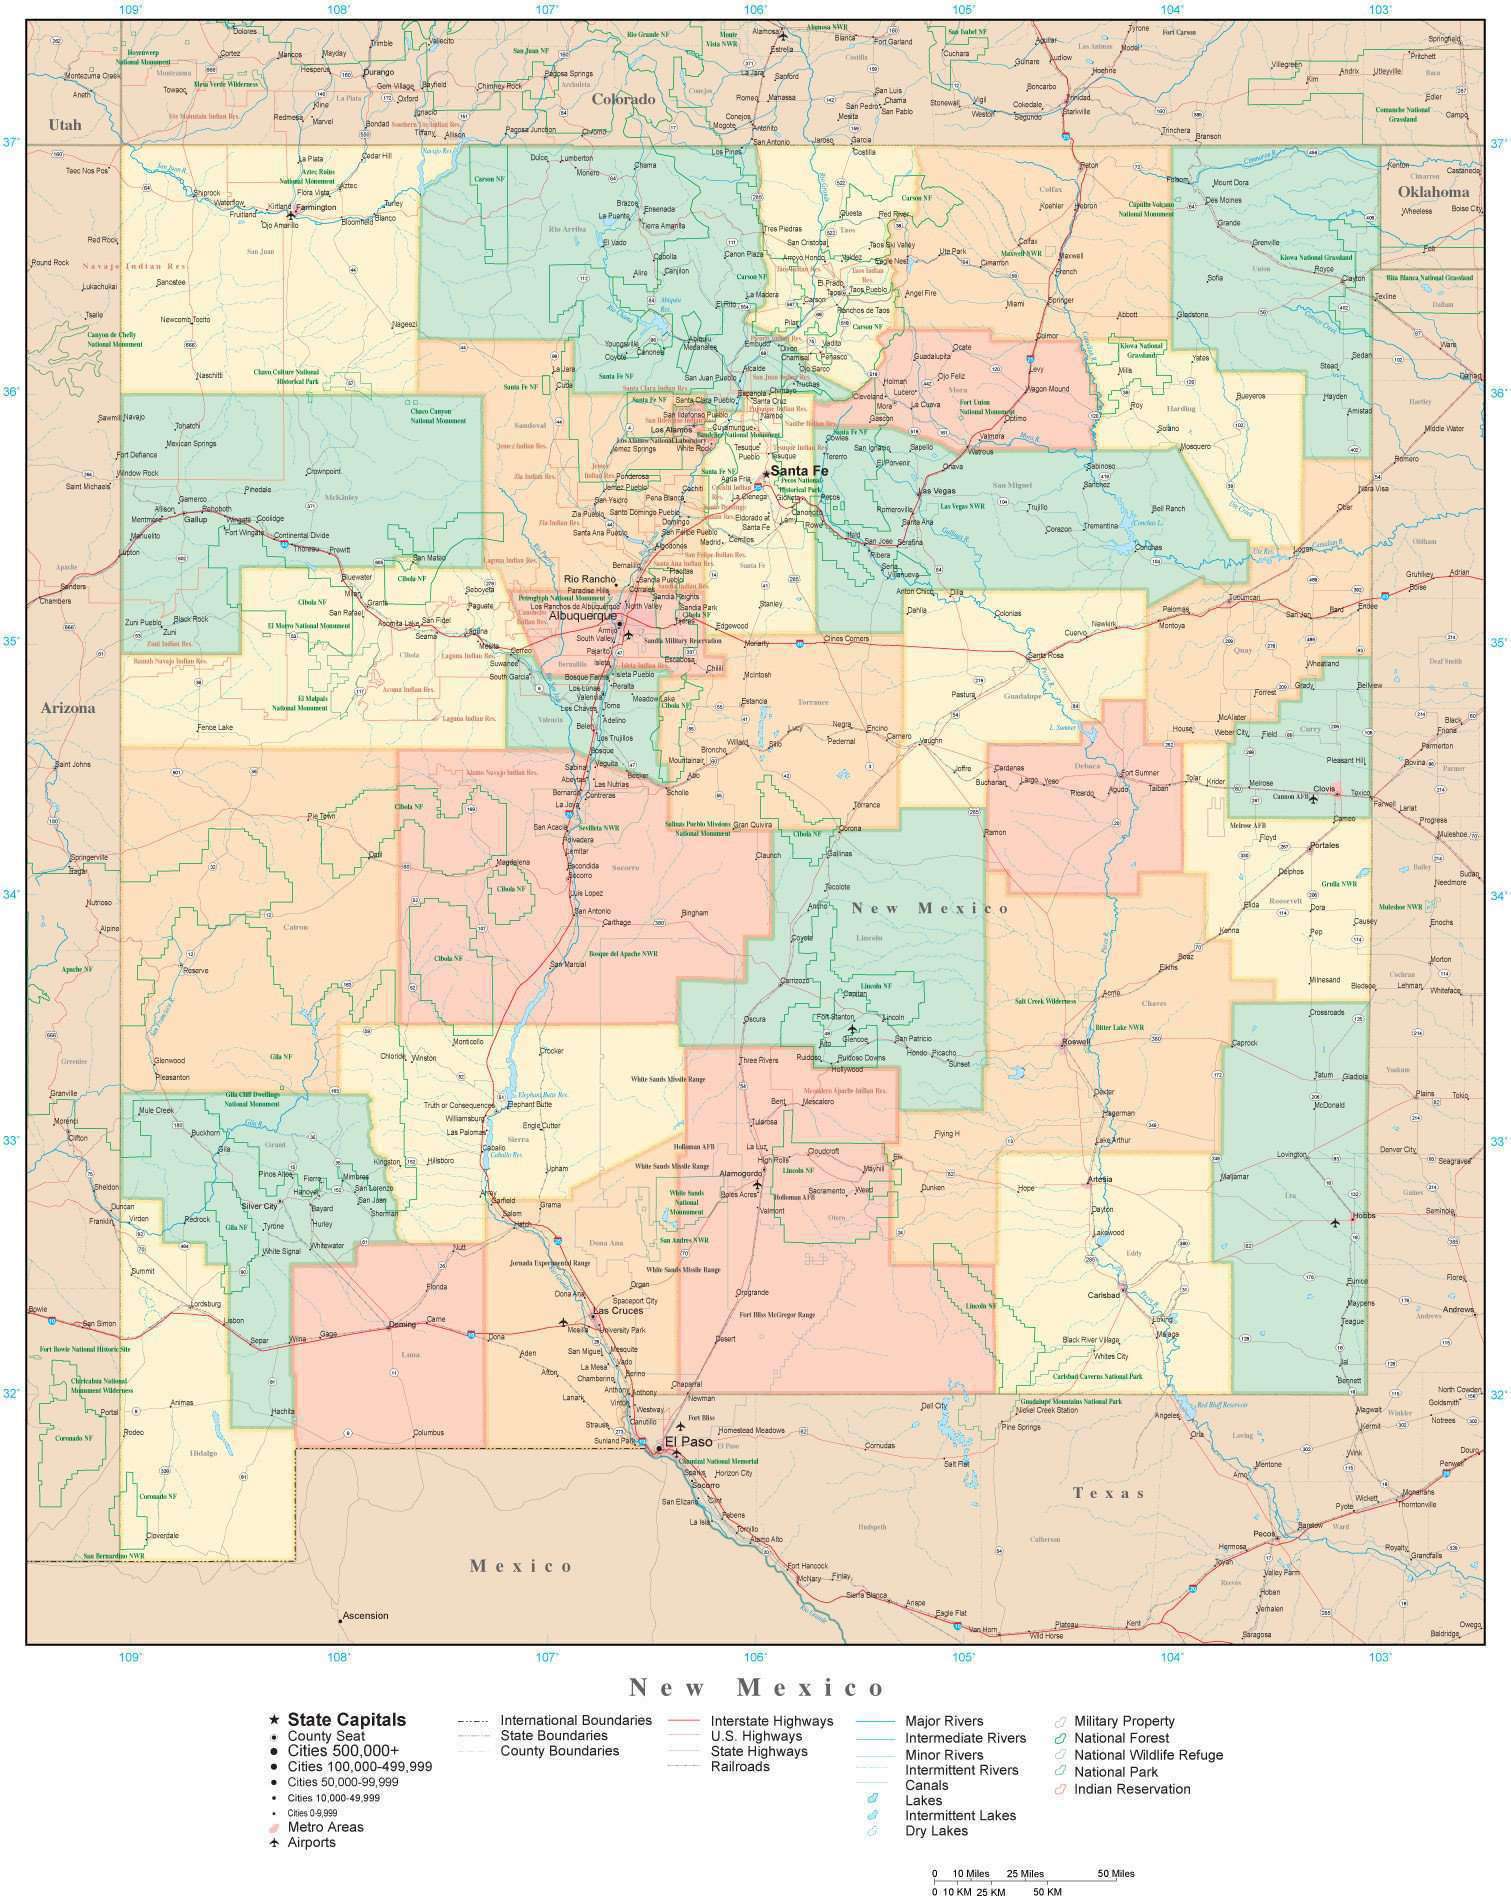 New Mexico map in Adobe Illustrator vector format. Detailed, editable